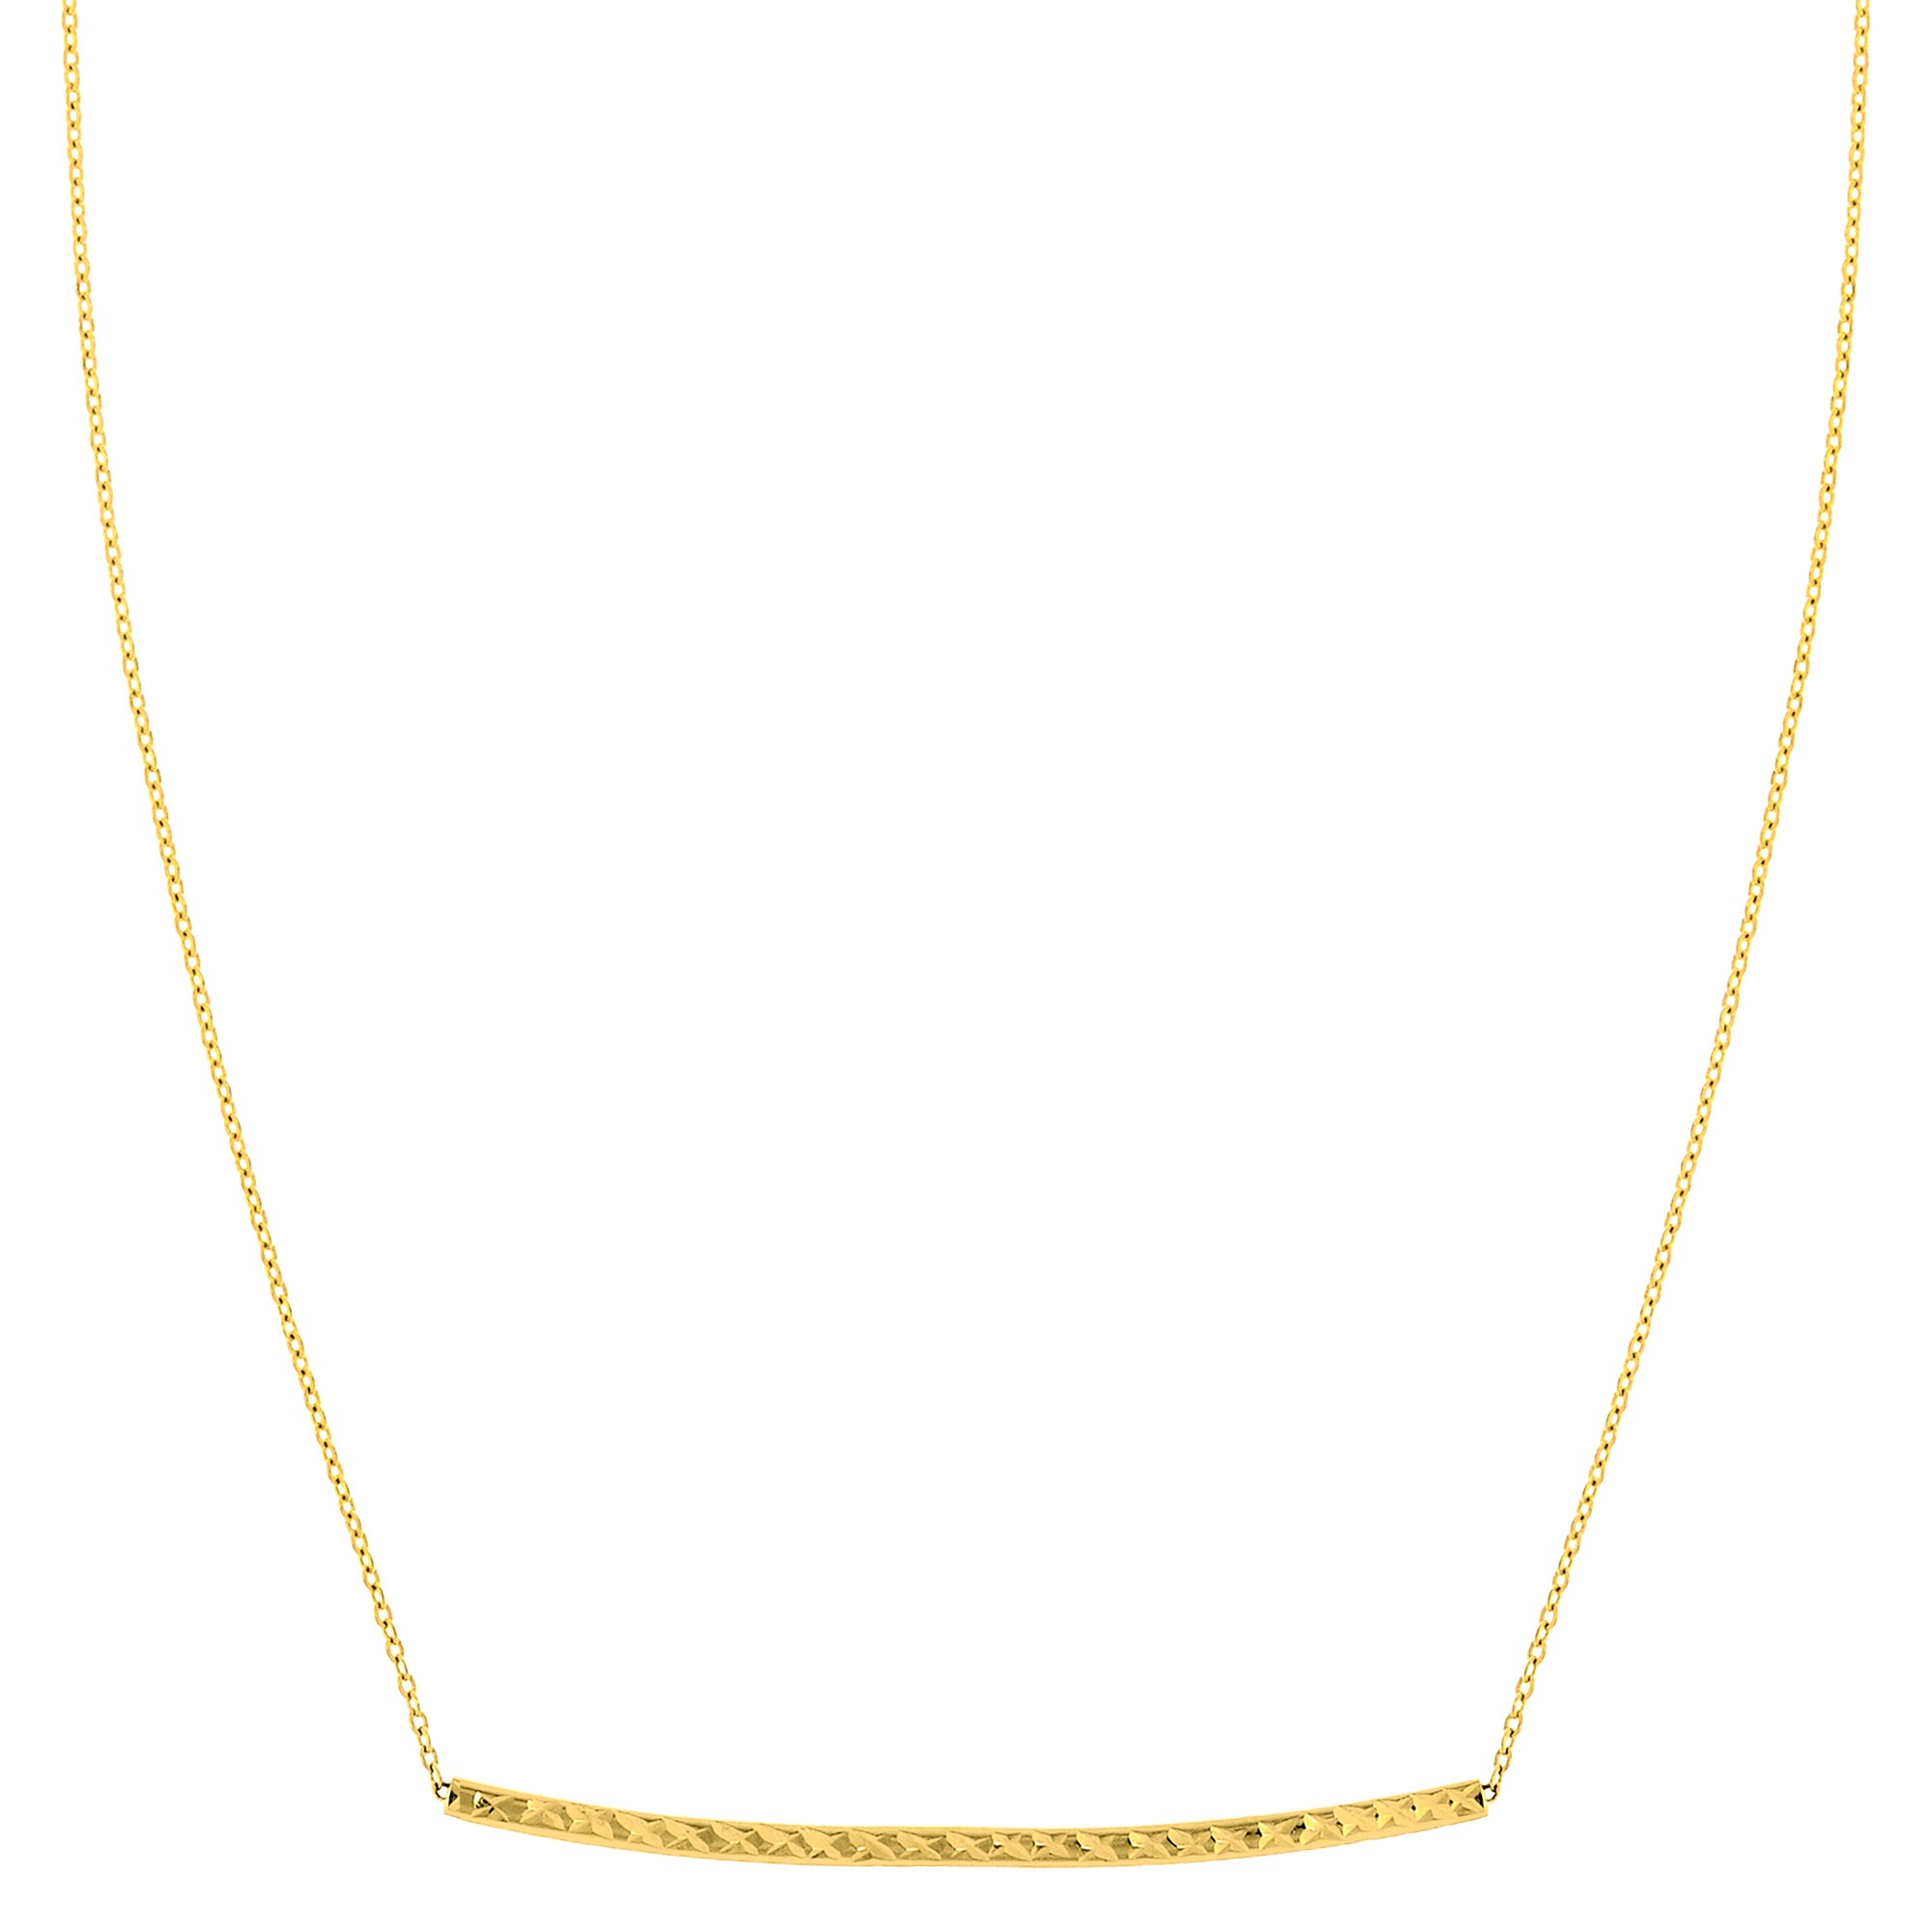 14K Yellow Gold Sideways Curved Bar Pendant Necklace, 17" fine designer jewelry for men and women